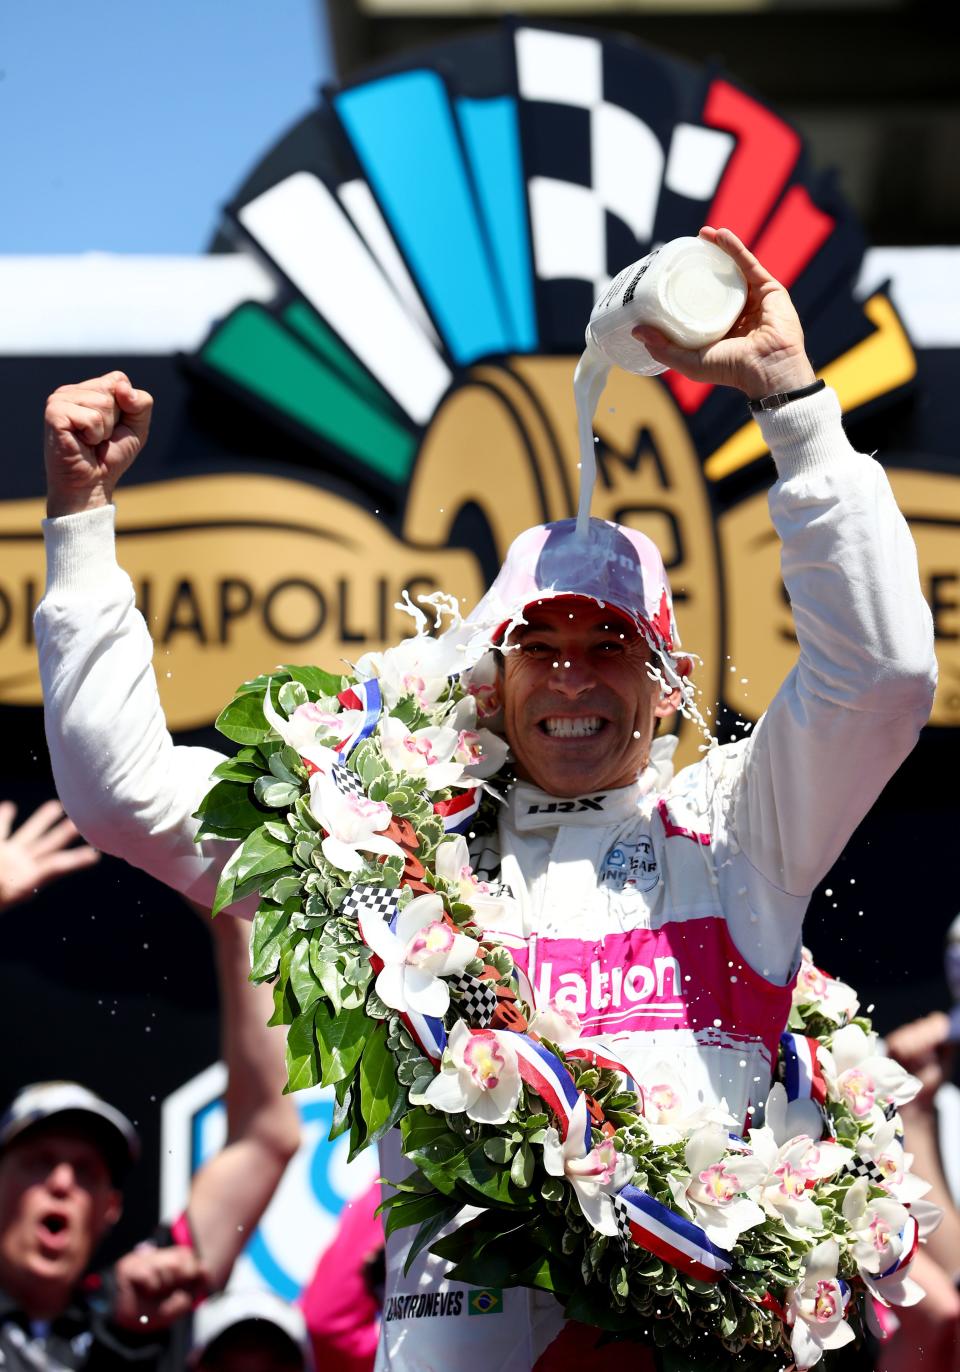 Meyer Shank Racing driver Helio Castroneves (6) pours milk over his head Sunday, May 30, 2021, after winning the 105th running of the Indianapolis 500 at Indianapolis Motor Speedway.